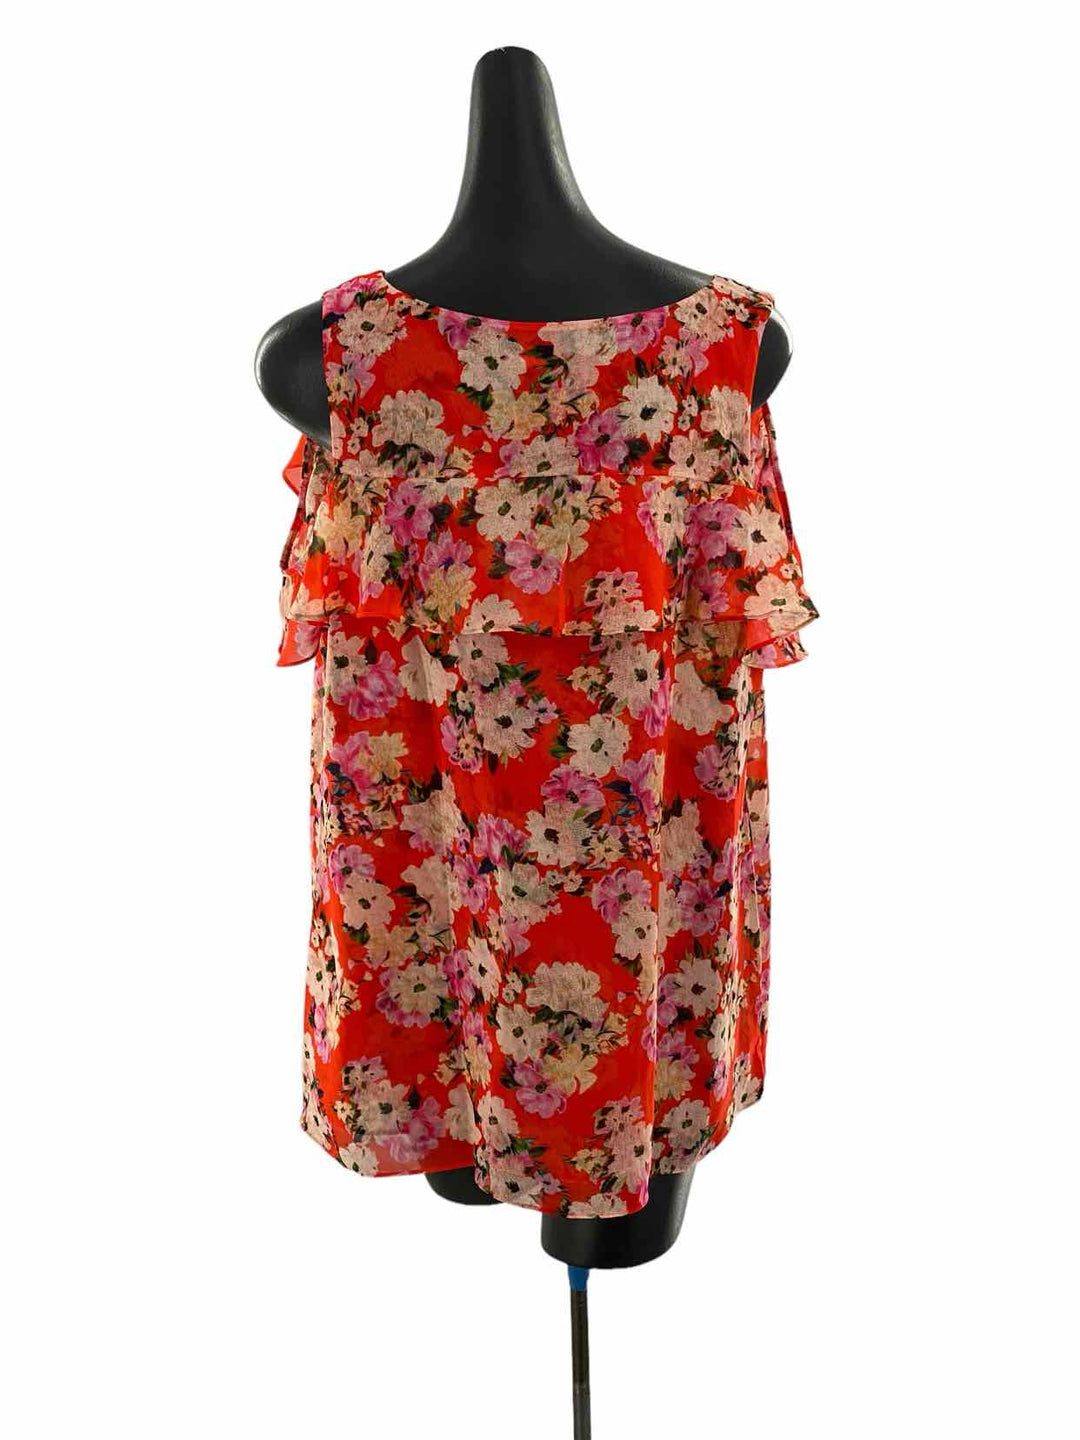 Cabi Size XL Red Multi Floral Tank Top